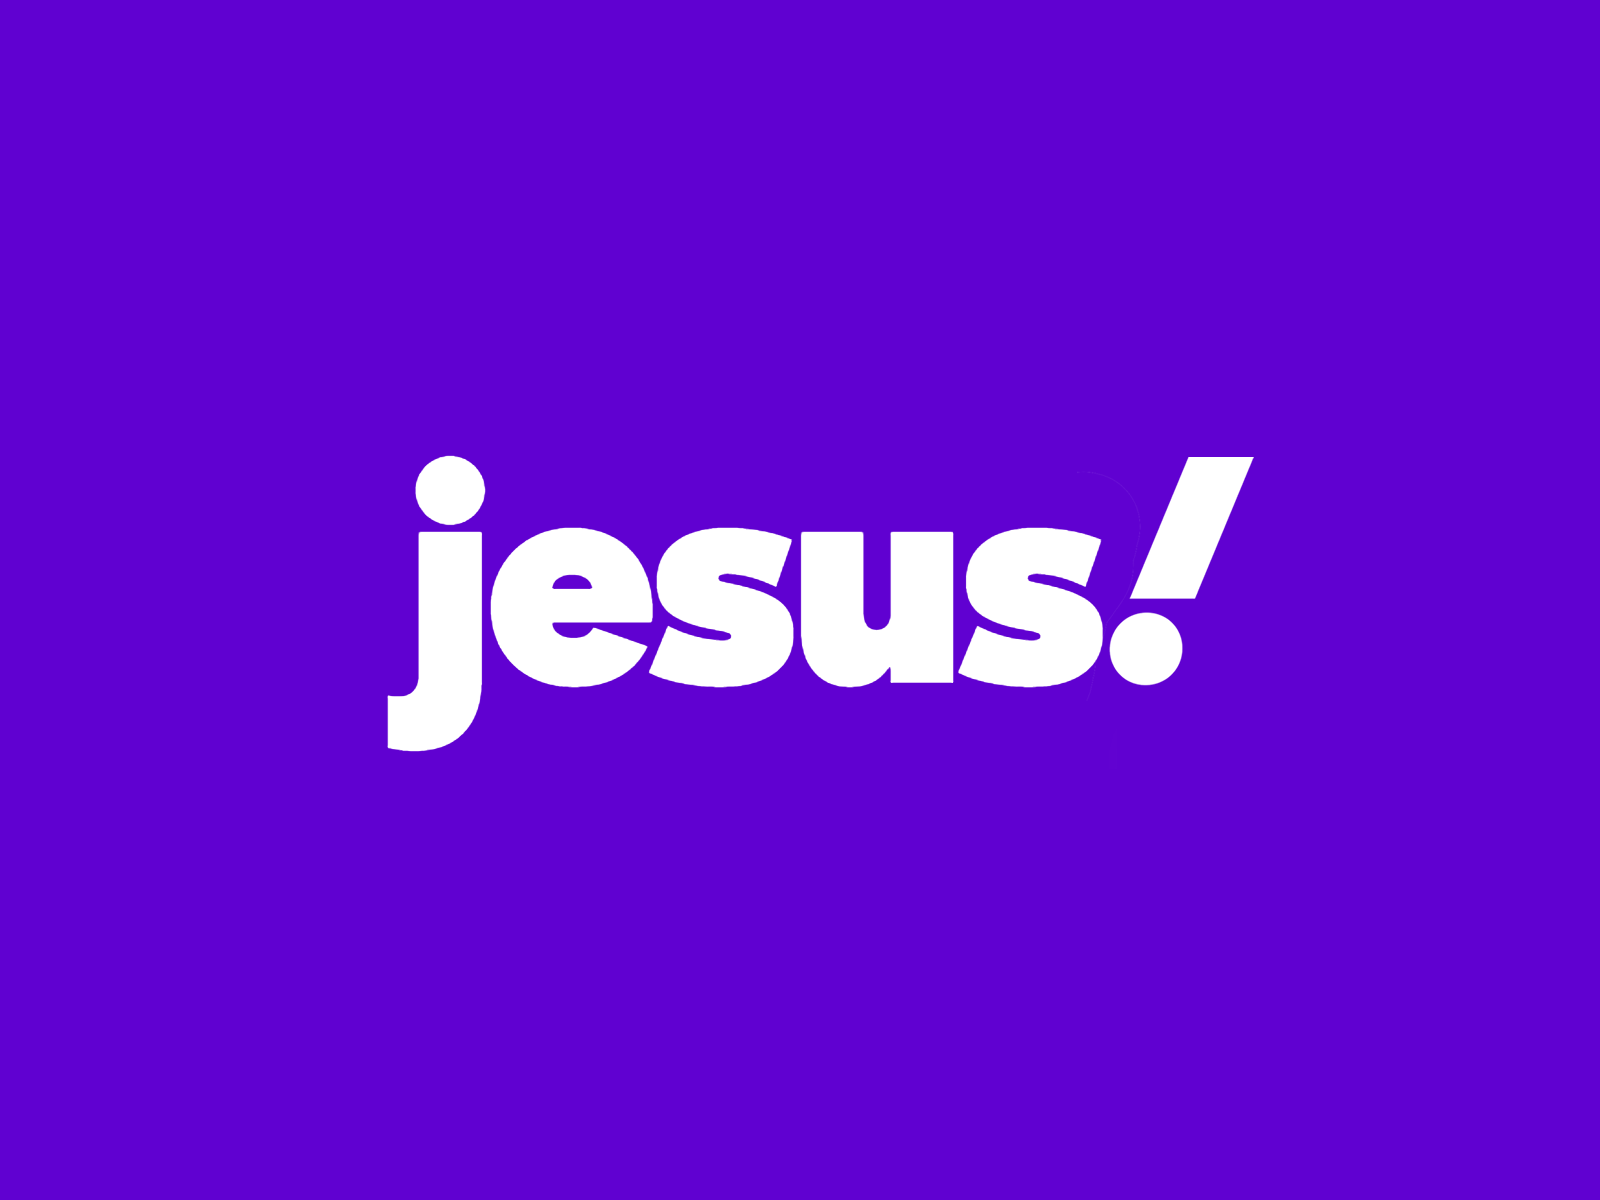 Jesus Loves who? 👉 You, that's who. Yahoo rebrand. by Bible.ooo ...